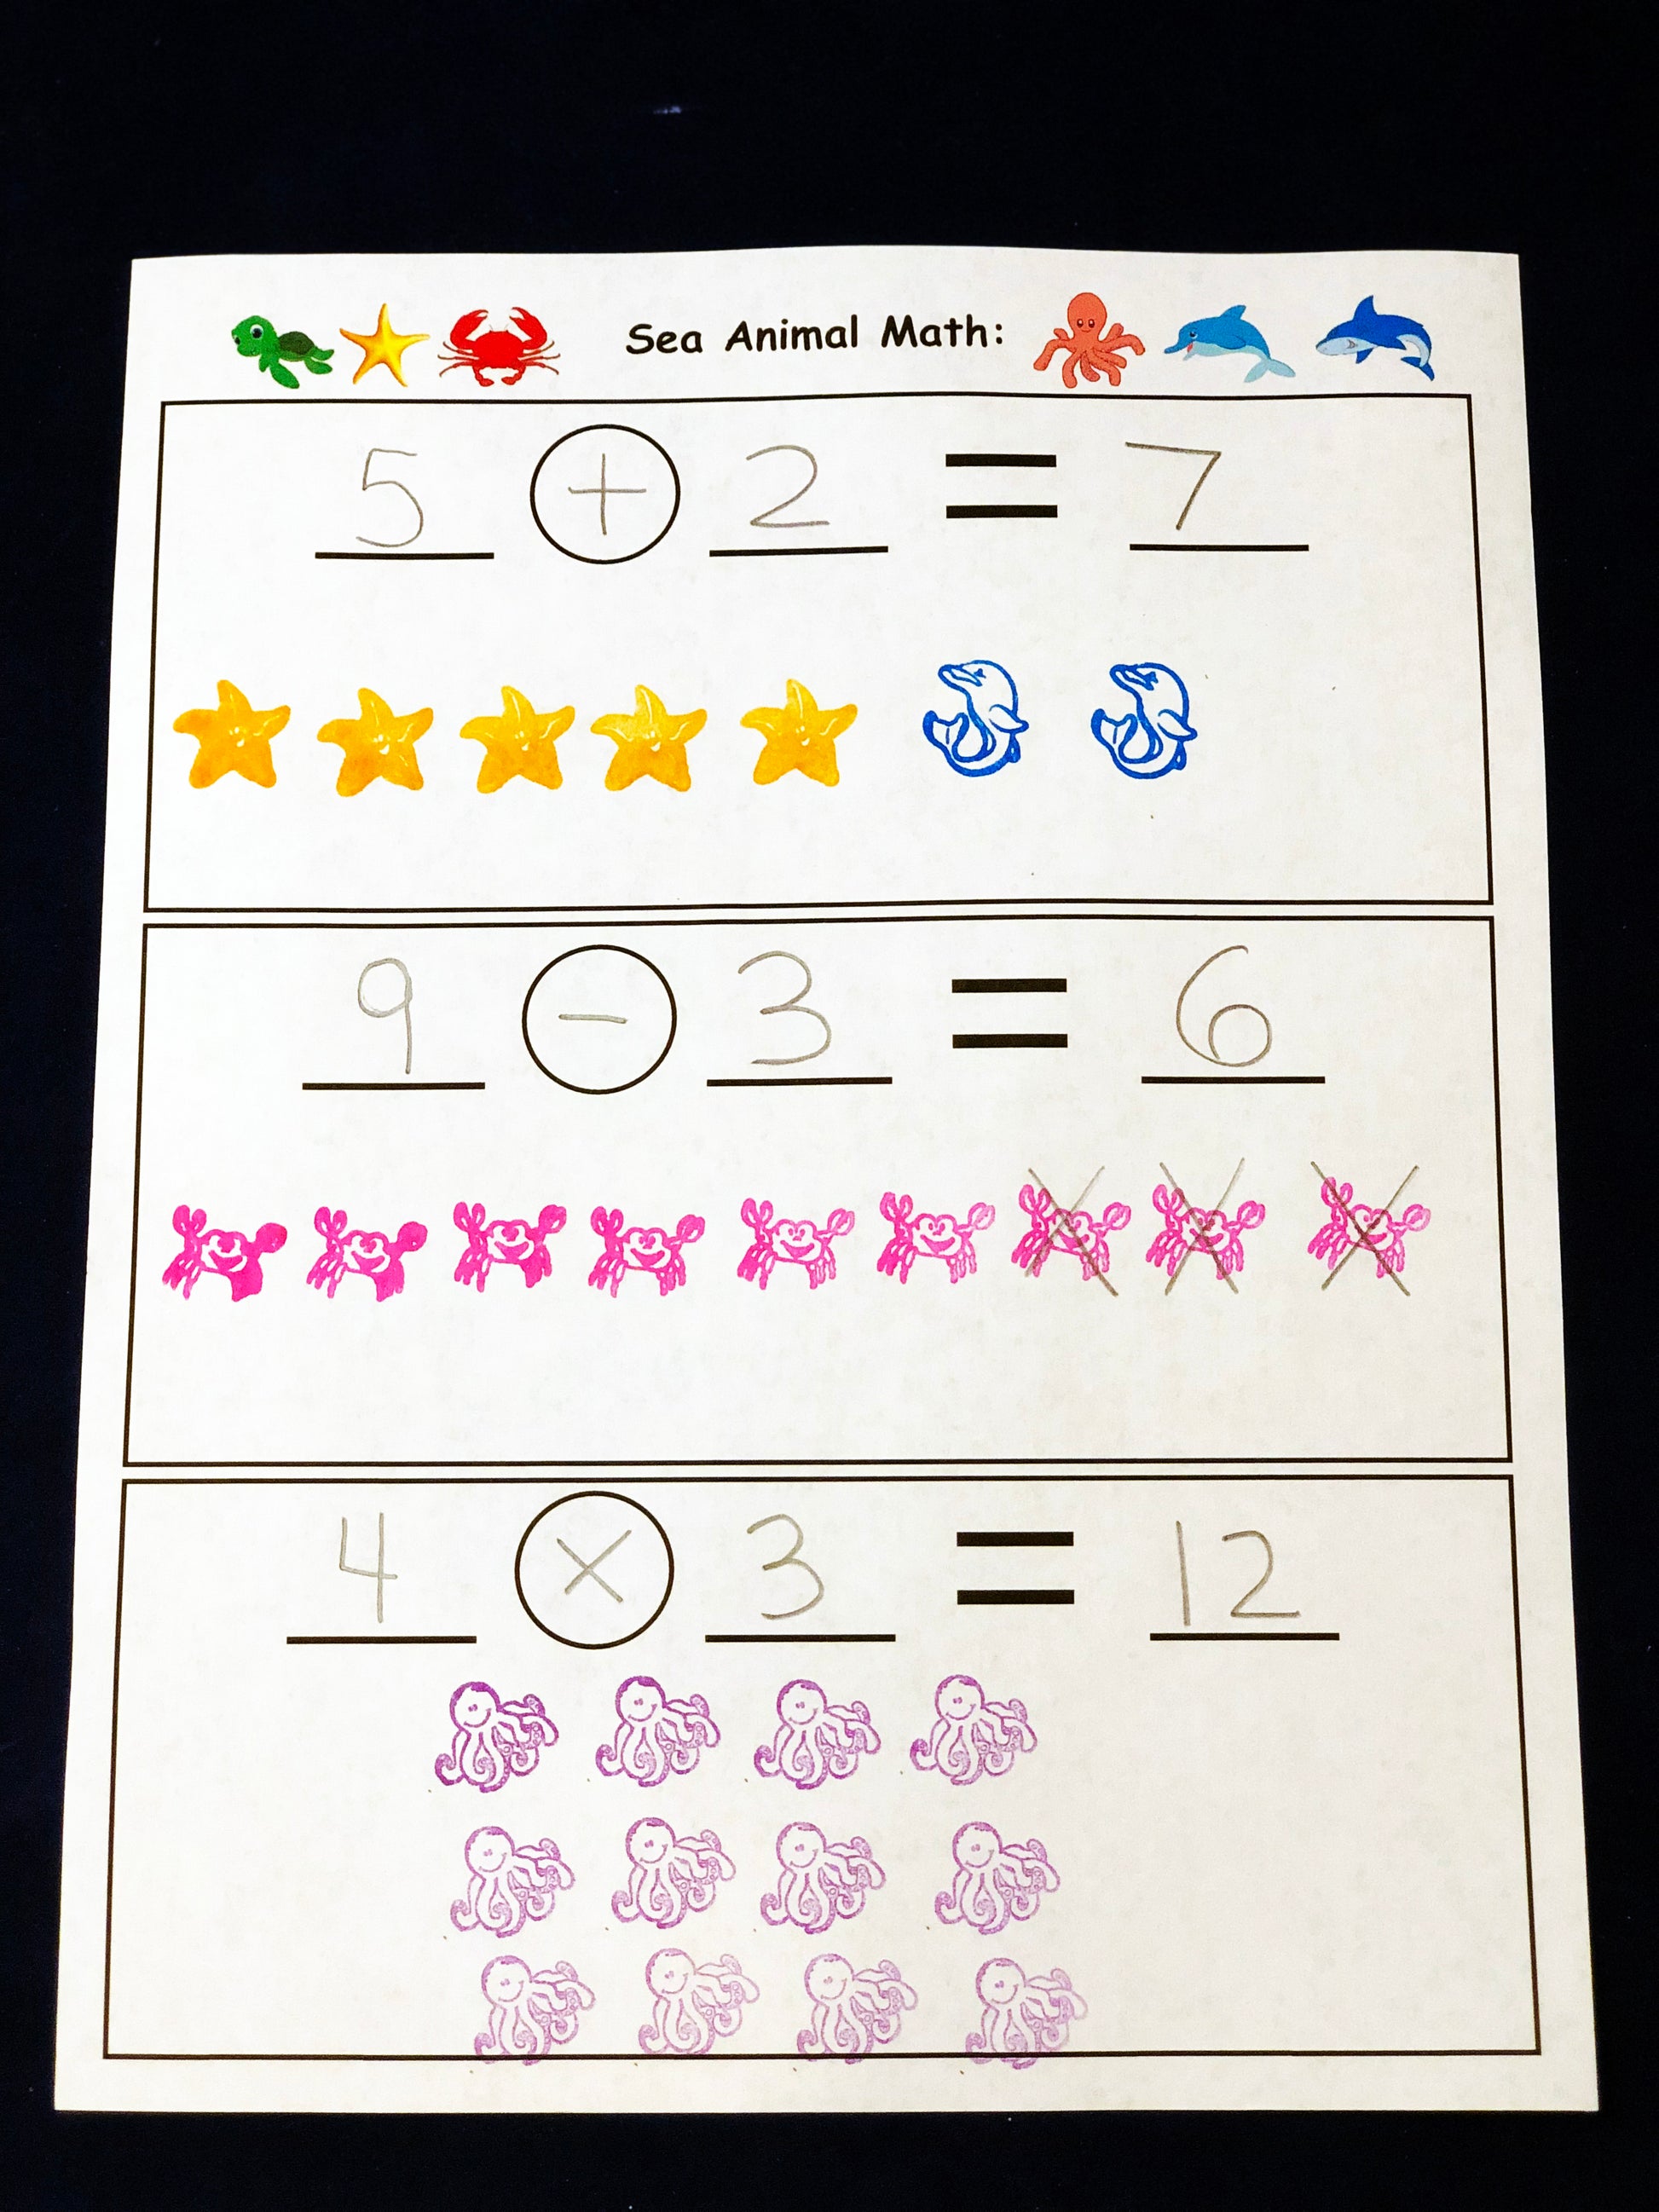 Using Stamps to solve math problems kids math games